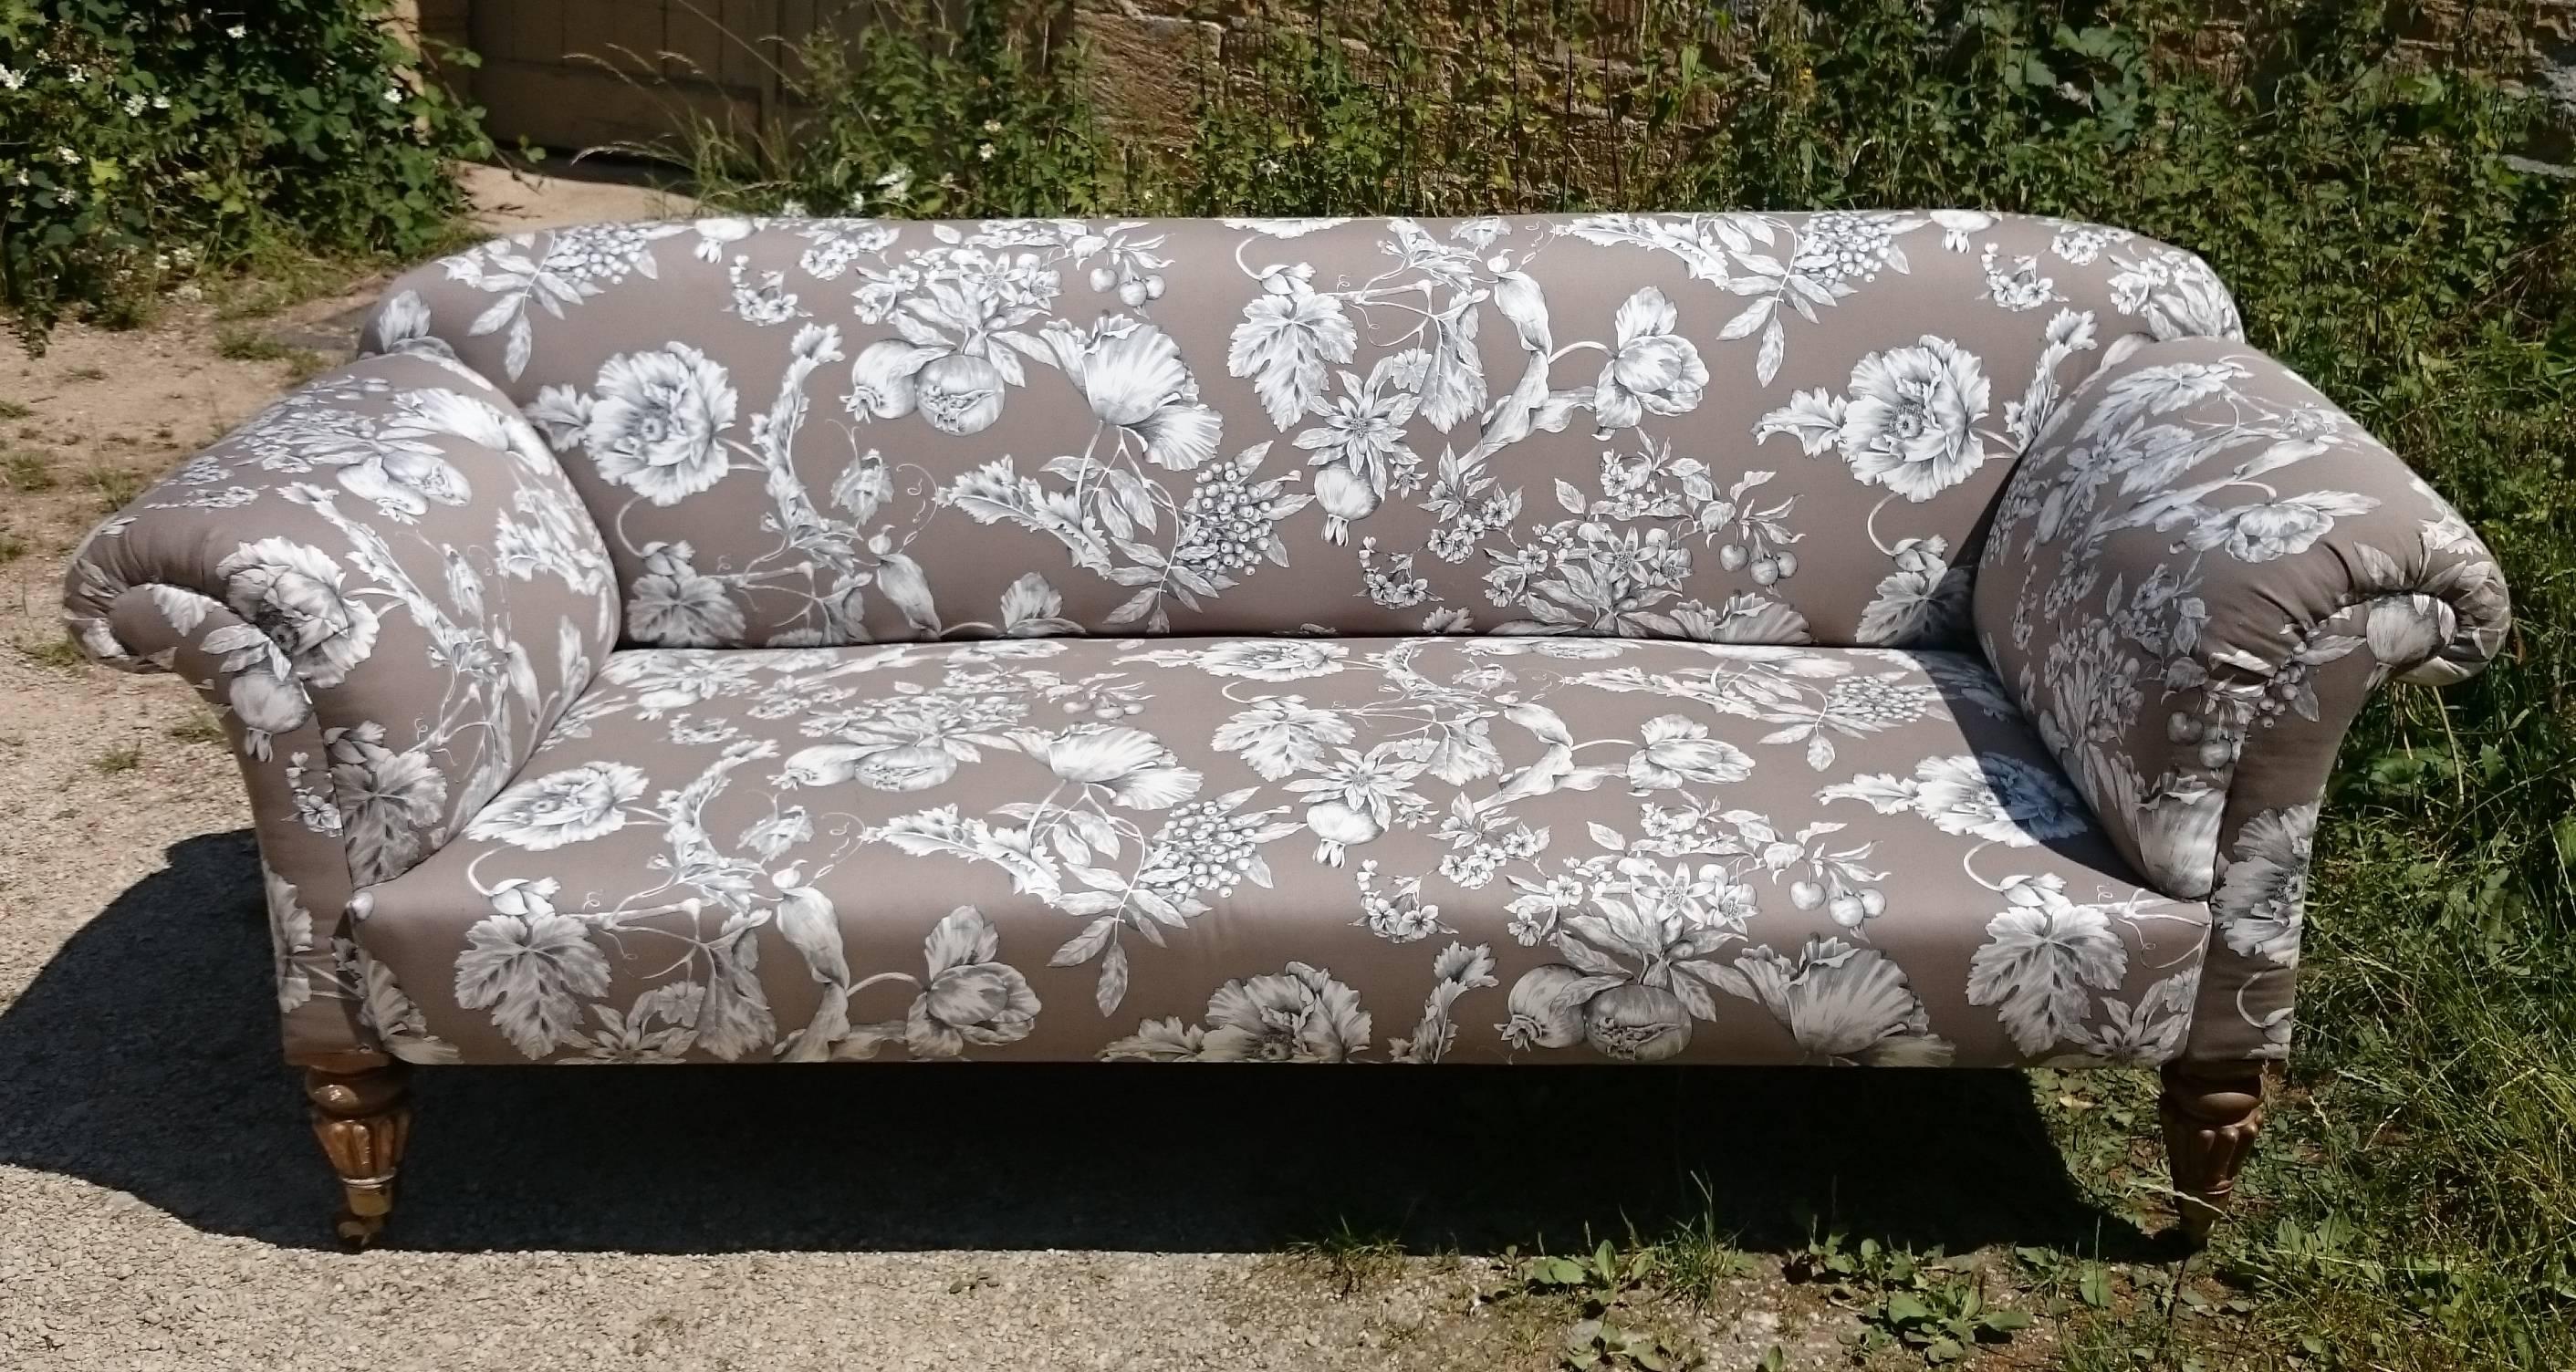 This is a very fine example of a 19th fine country house drawing room antique sofa or settee. It is a generous shape with scroll arms and gently raised back. This sofa has coiled springs which dates it to post 1828, but the legs are a good Fine